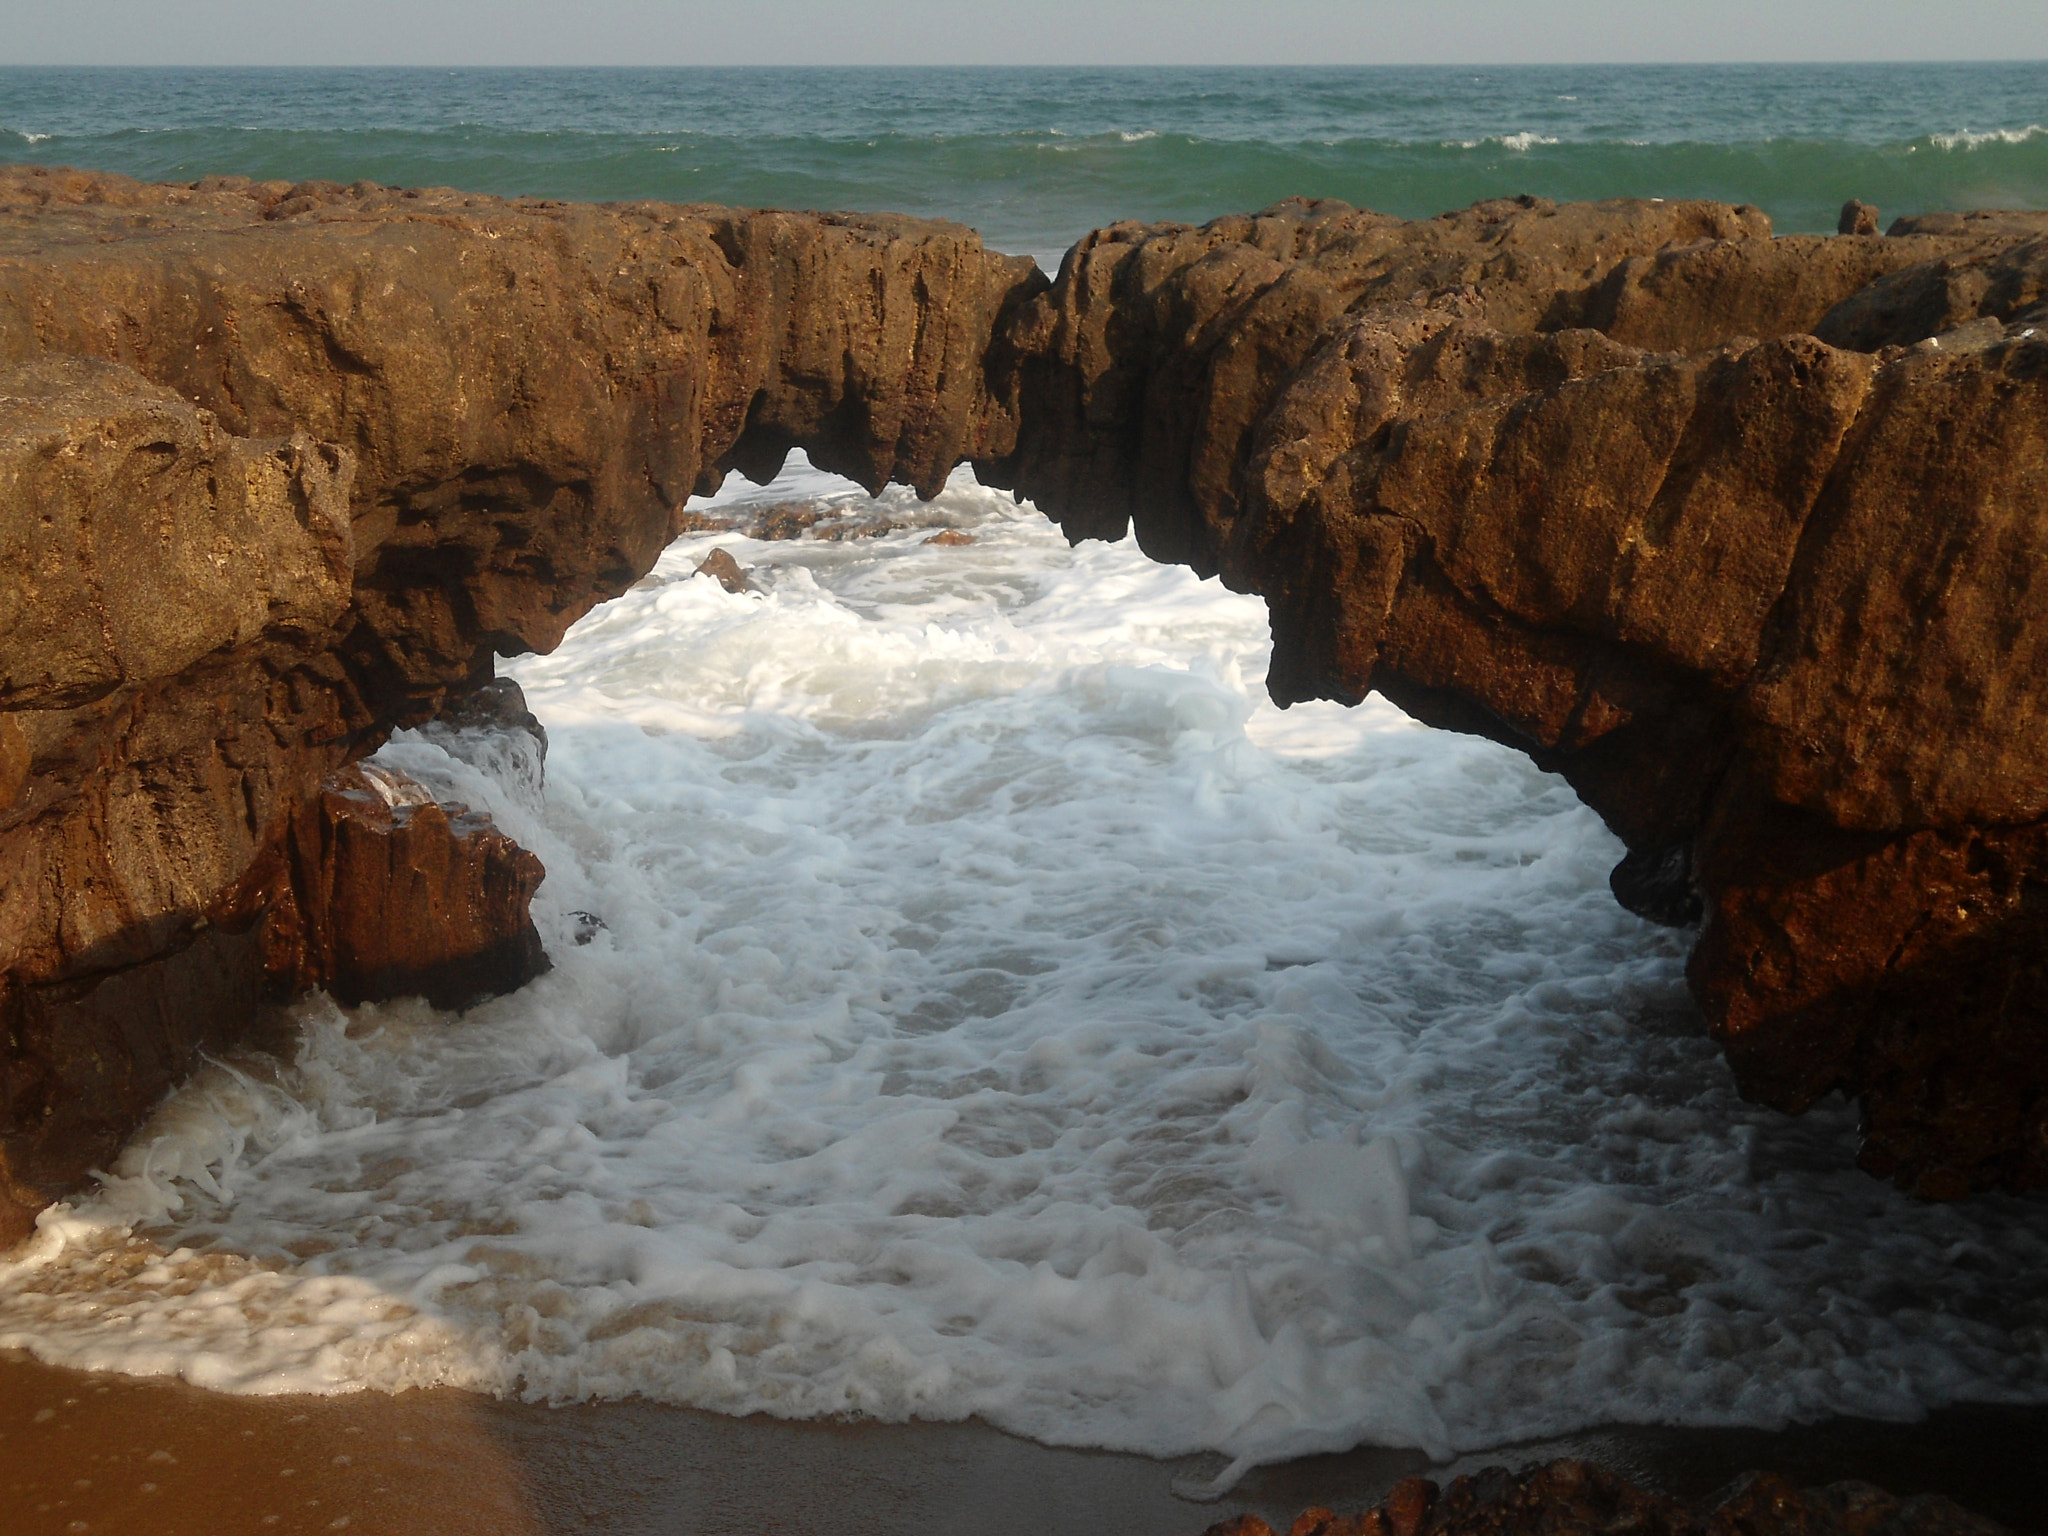 Sony Cyber-shot DSC-W510 sample photo. Natural arch (water eroded) at thotlakonda beach photography